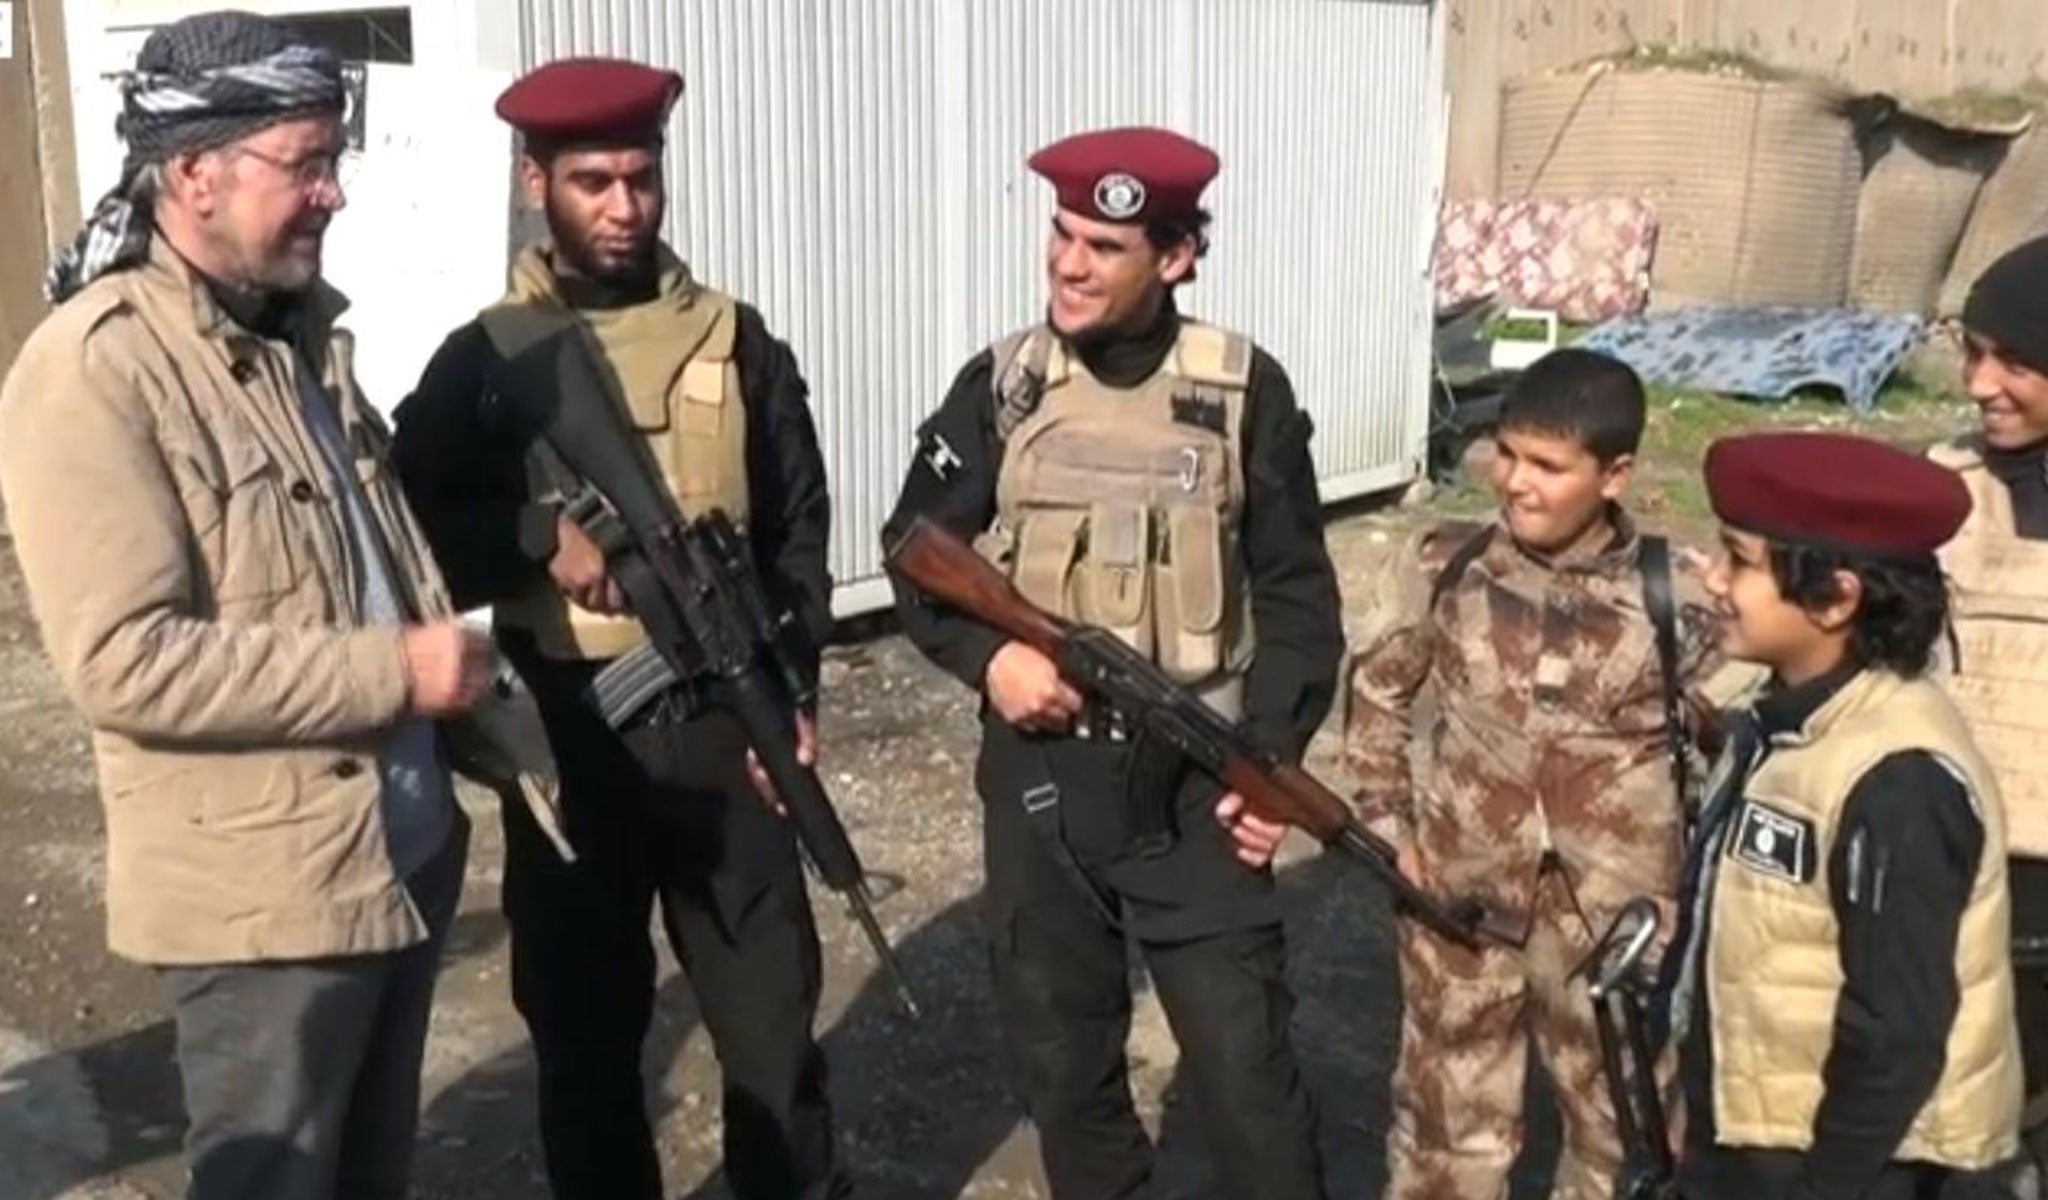 Mr Todenhoefer (far left) met with child fighters equipped with guns Mosul